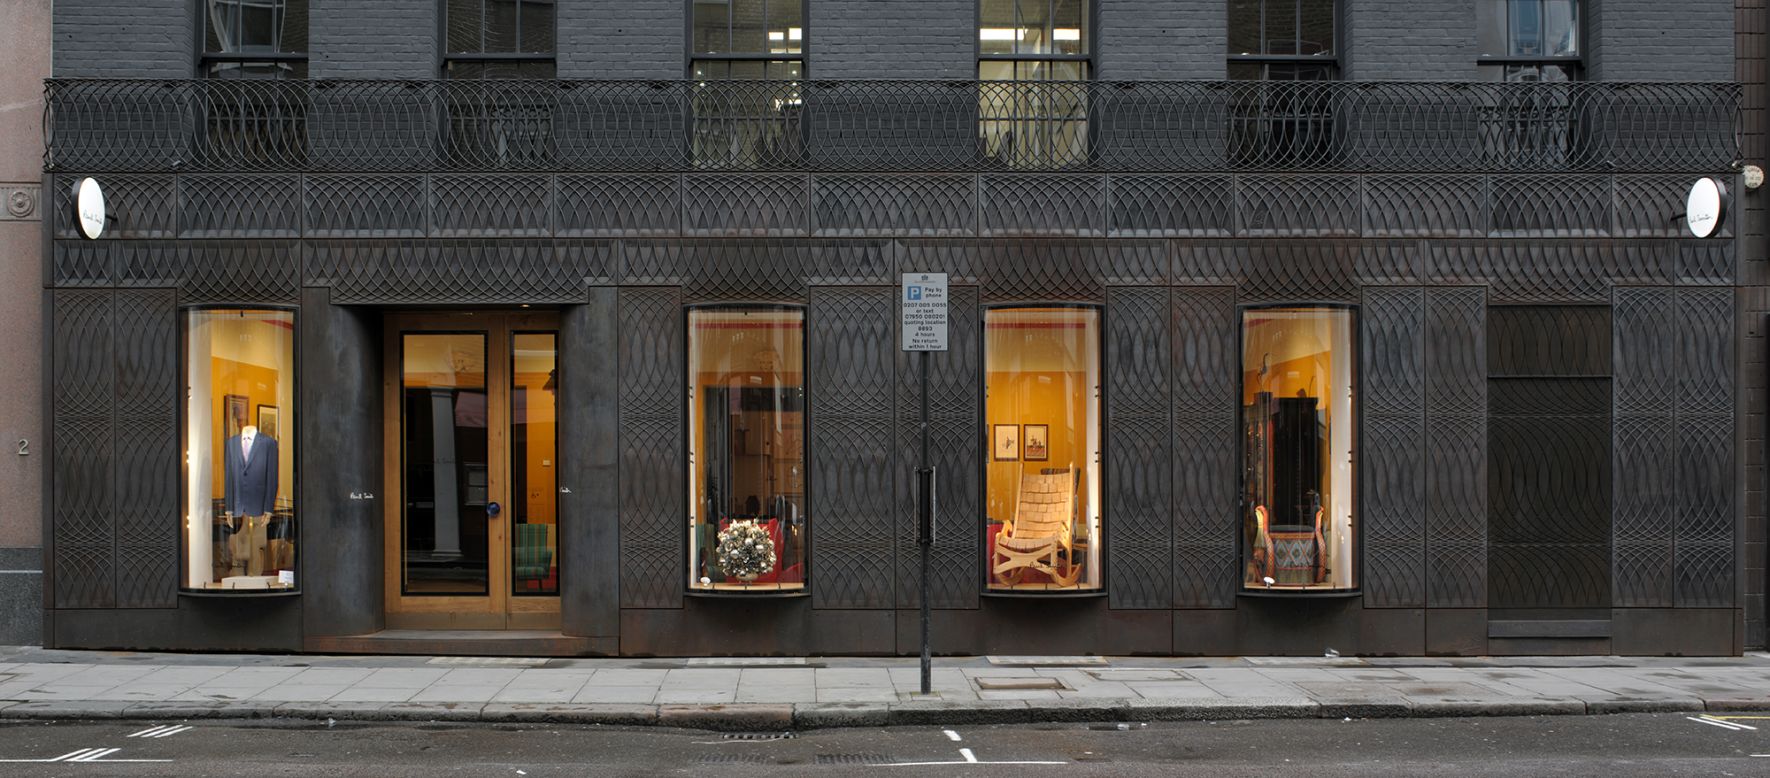 <em>Facade for Paul Smith, Albermarle Street, Mayfair, London </em><br /><br />The front of designer Paul Smith's shop in one of London's most exclusive districts features cast iron which curves around the building's Regency shape, giving it an abstract spin. Designed by <a href="http://www.6a.co.uk/" target="_blank" target="_blank">6a Architects</a>, the facade's sinuous windows reflect the glass in nearby arcades. 